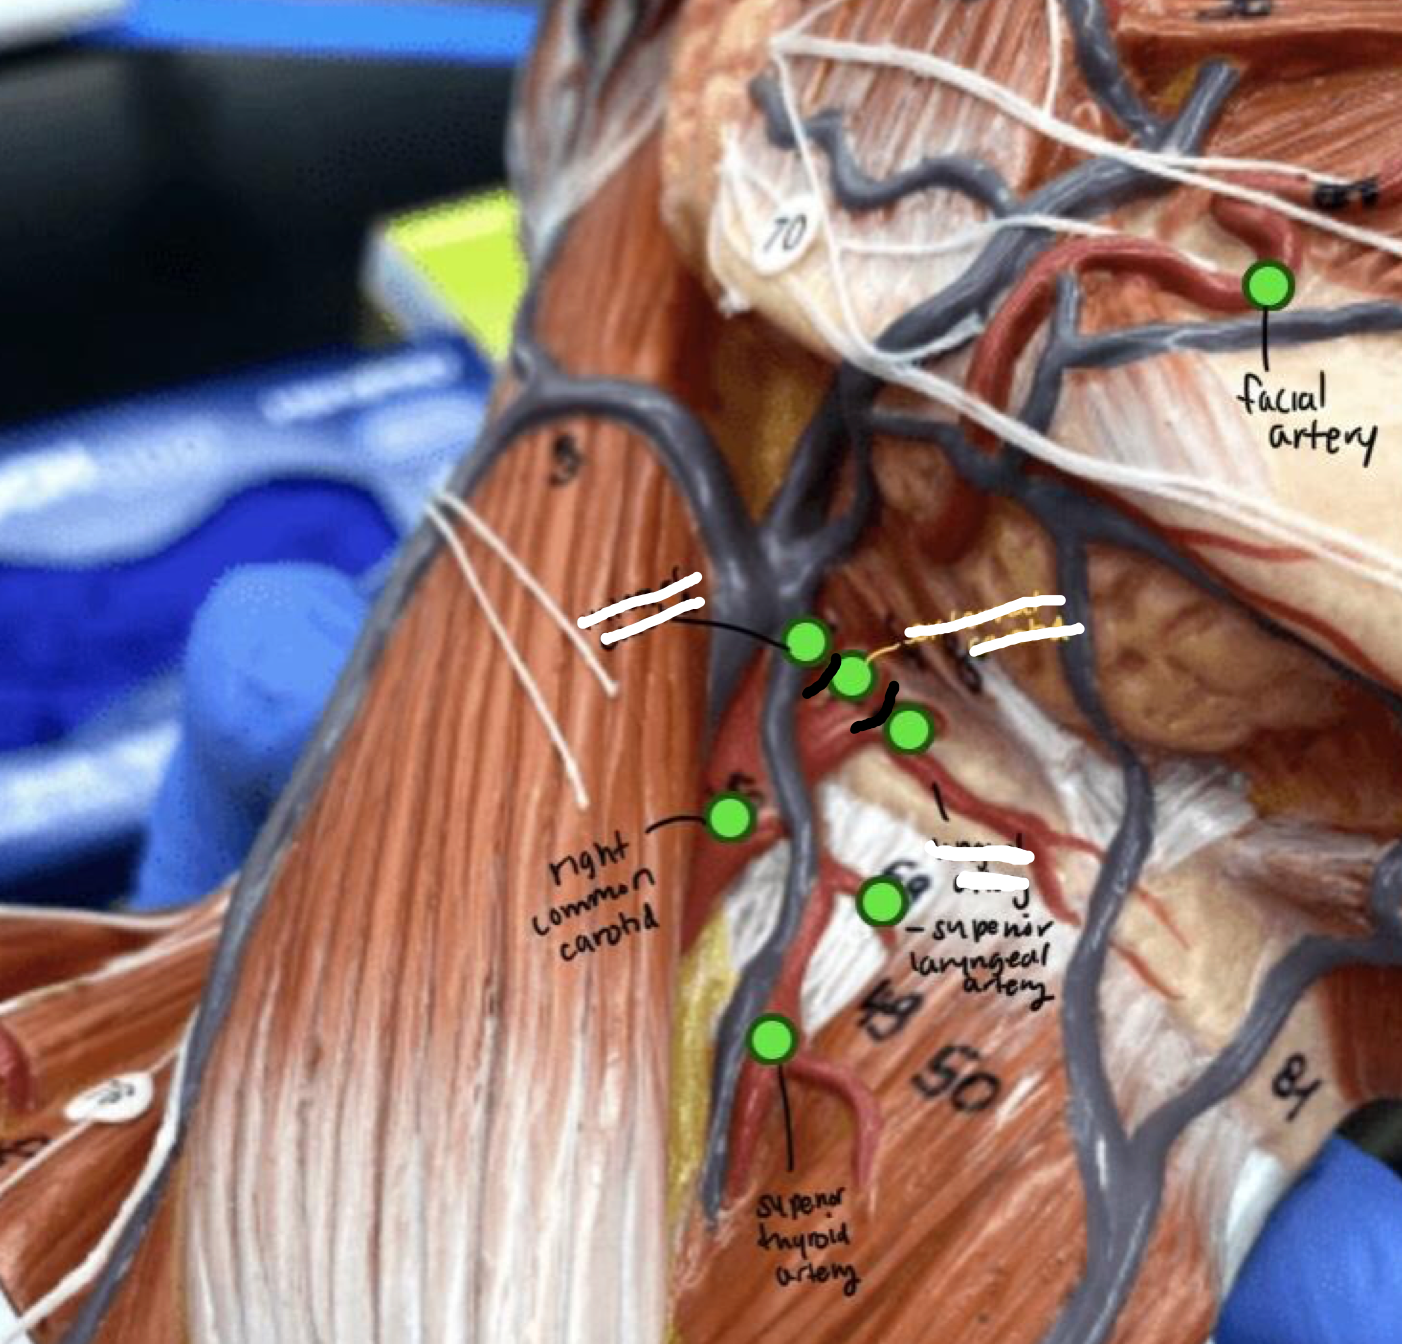 <p>Short upper part of the red neck artery</p>